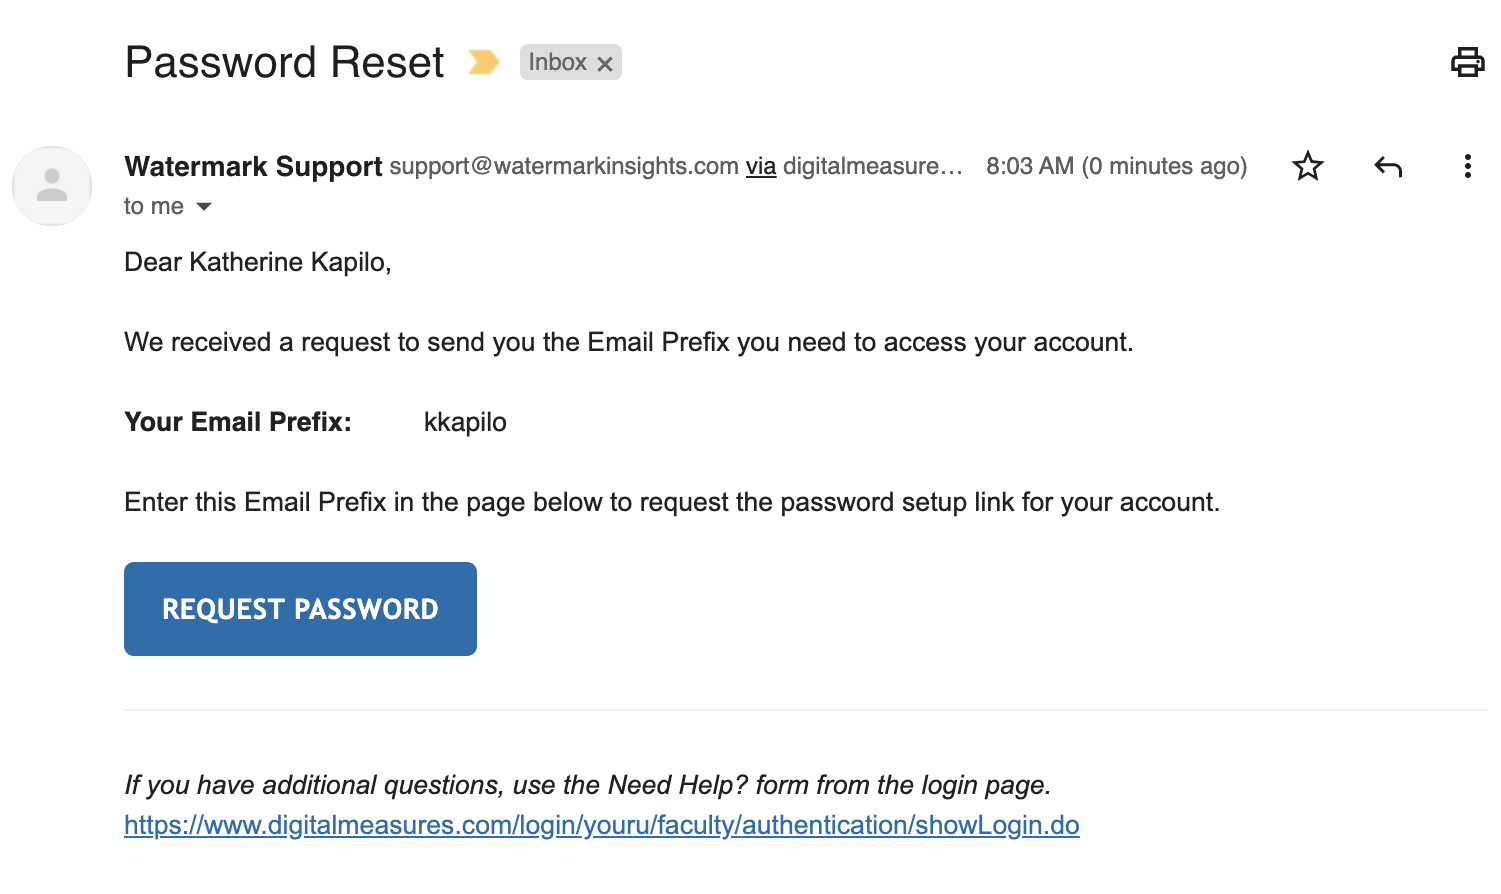 Faculty_Success_-_Updated_Password_Reset_Request_Email_Notification.png